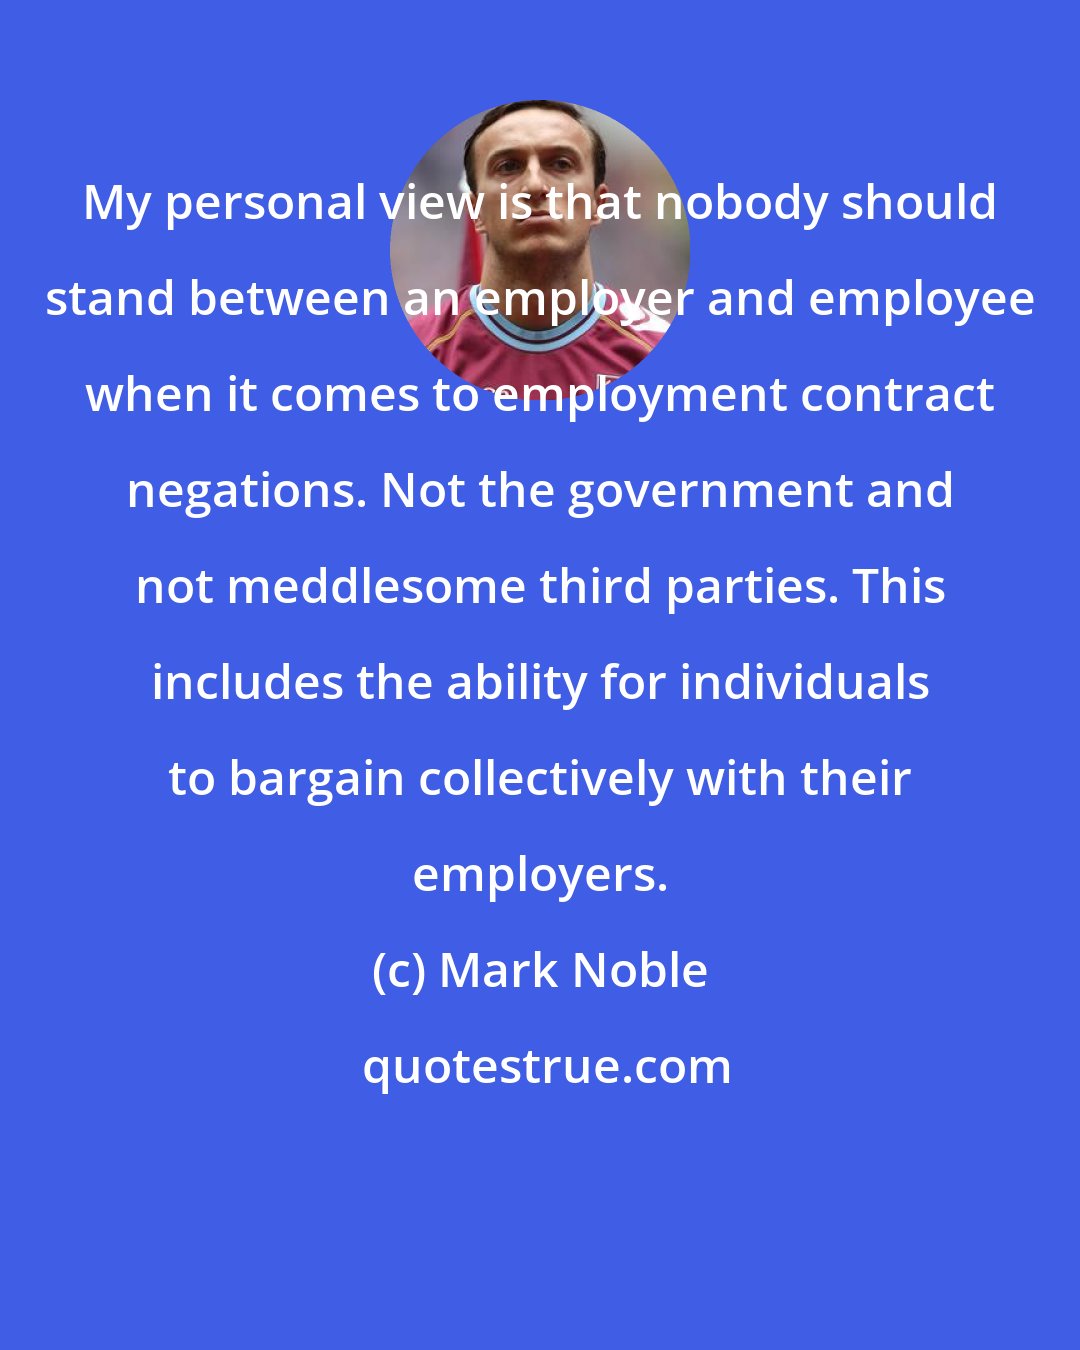 Mark Noble: My personal view is that nobody should stand between an employer and employee when it comes to employment contract negations. Not the government and not meddlesome third parties. This includes the ability for individuals to bargain collectively with their employers.